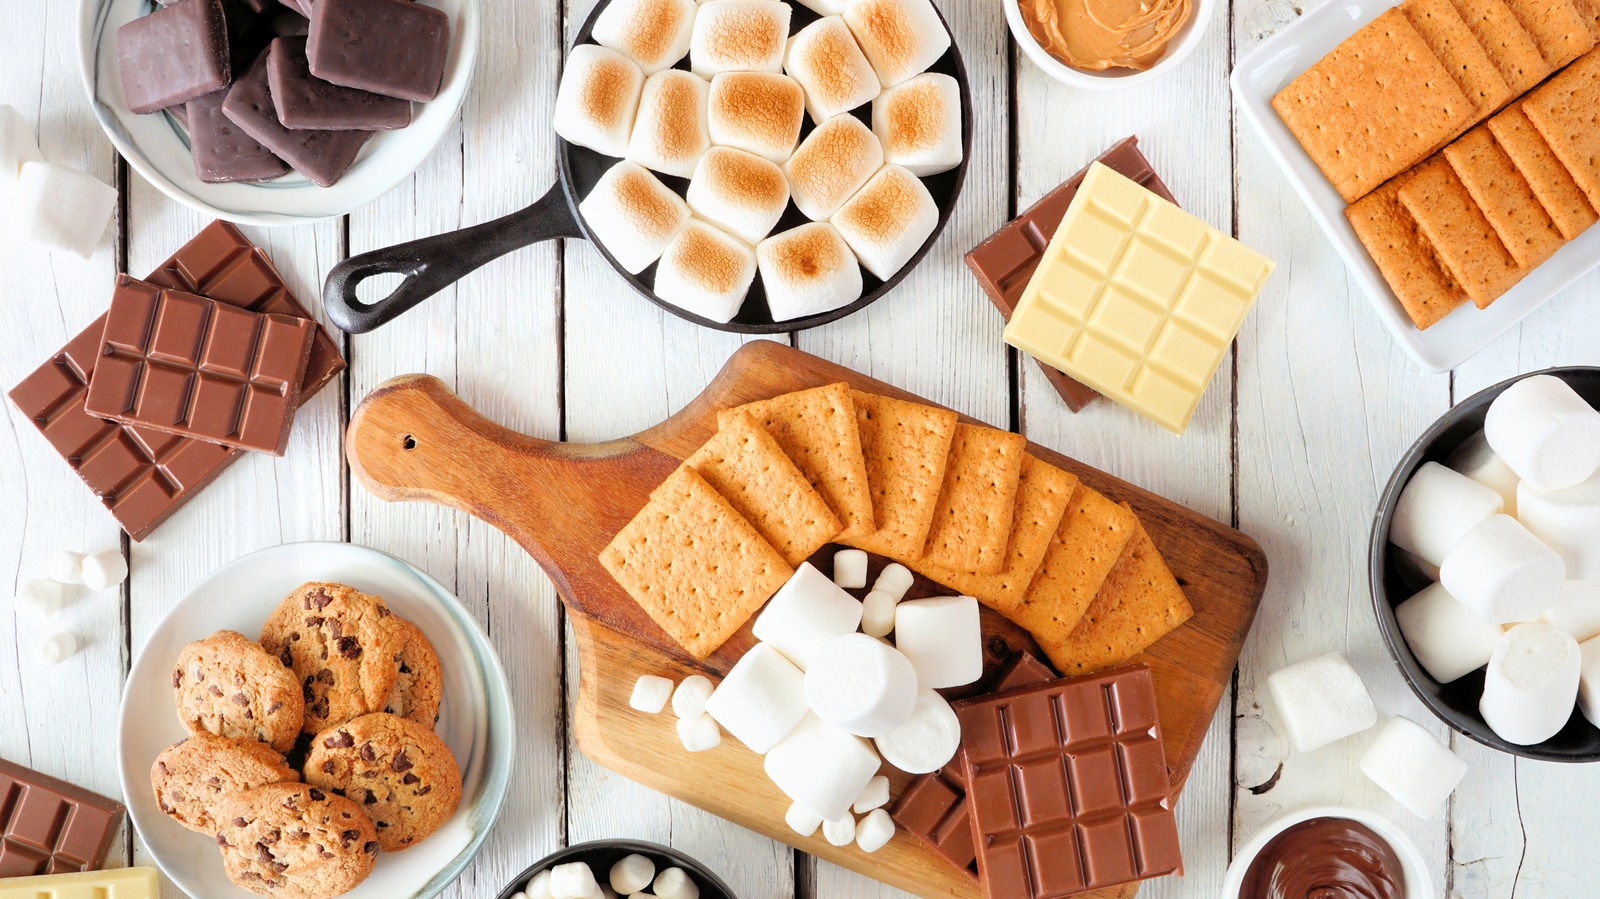 https://www.thedailymeal.com/img/gallery/14-easy-additions-to-amp-up-your-smores/l-intro-1679783022.jpg